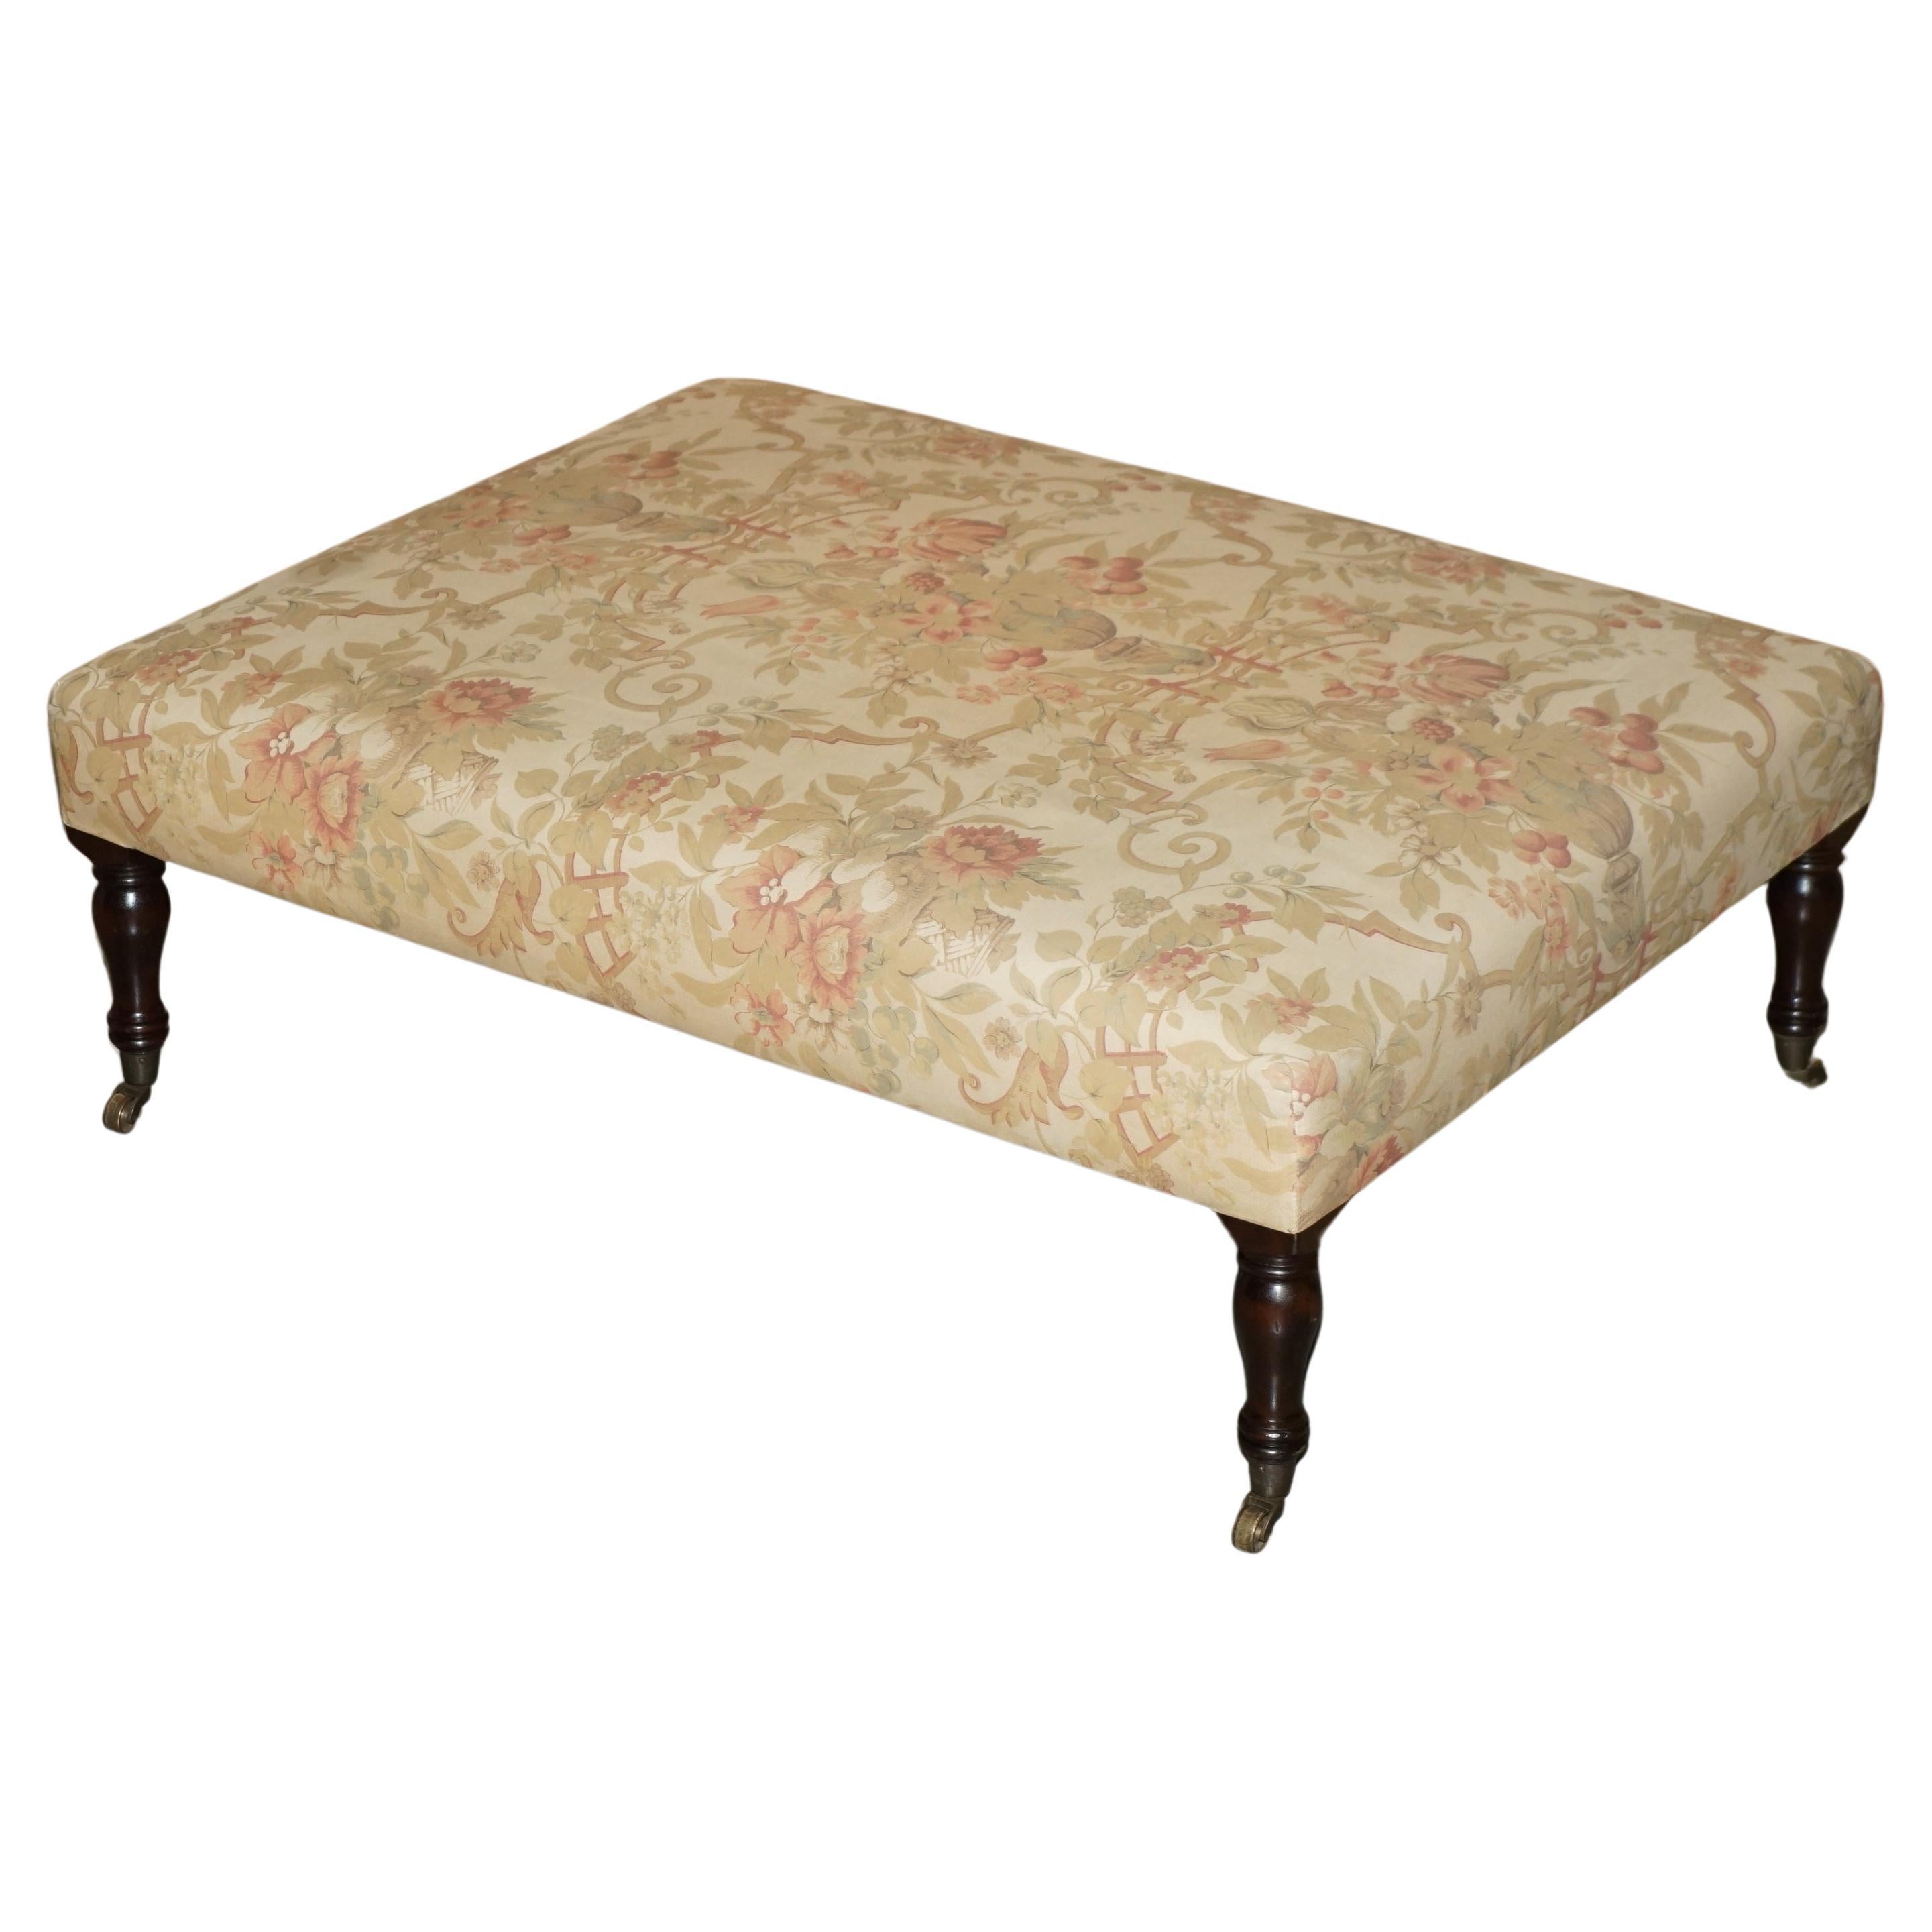 COLLECTABLE VERY LARGE ViNTAGE GEORGE SMITH CHELSEA FLORAL FOOTSTOOL OTTOMAN For Sale